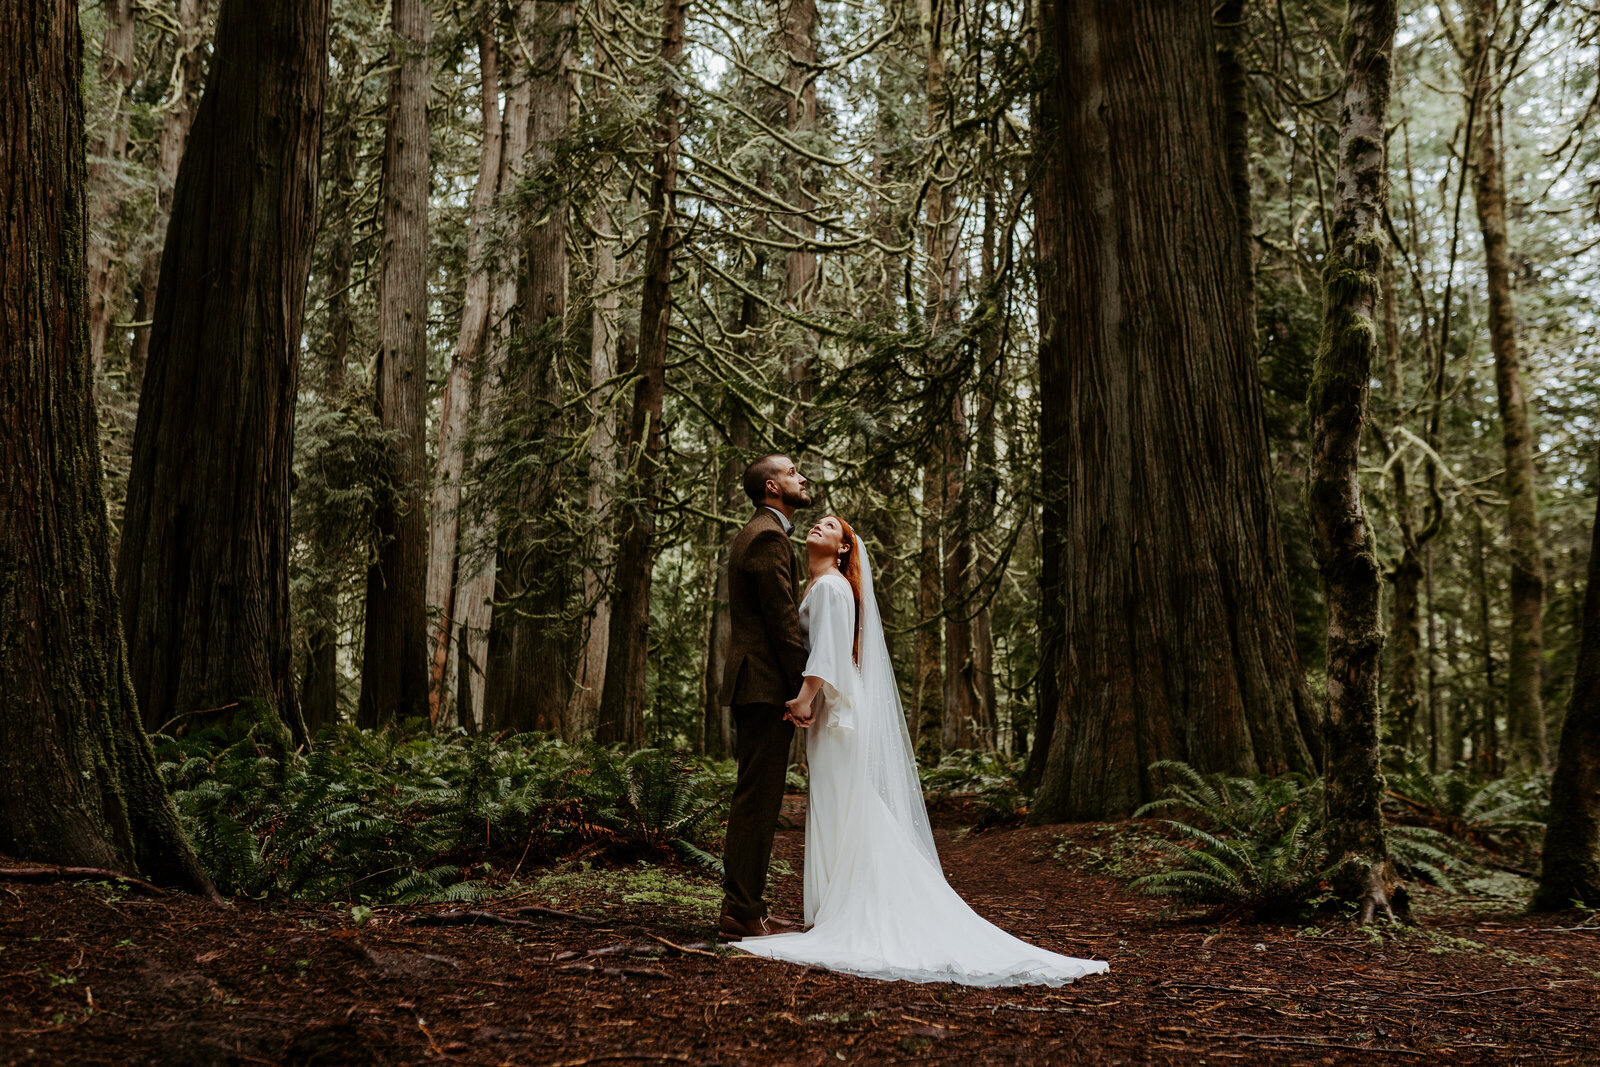 Bride and groom in wedding attire looking up at the Douglas Fir trees in Olympic National Park, Washington